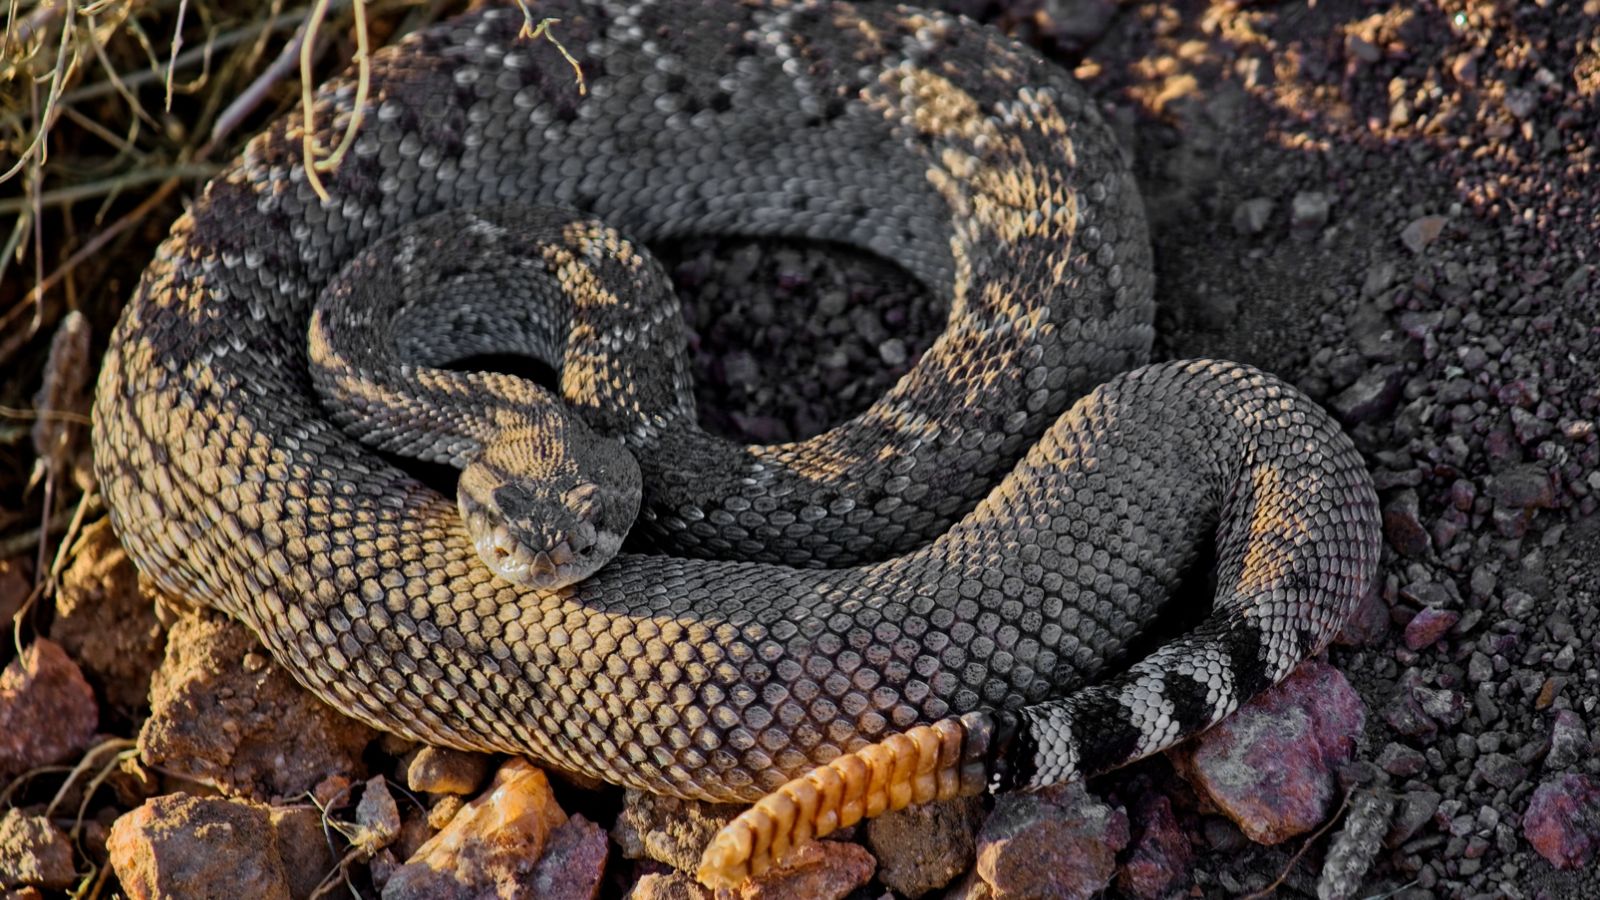 <p>Both the Eastern and Western Diamondback Rattlesnake are deadly American residents with a distinctive warning ‘tail rattle.’ <a href="https://reptilesmagazine.com/top-10-venomous-north-american-snakes/">Reptiles Magazine</a> states they’re both large snakes with long fangs capable of delivering venom that causes excessive bleeding and heart problems—often leading to cardiac arrest unless anti-venom is administered.</p>